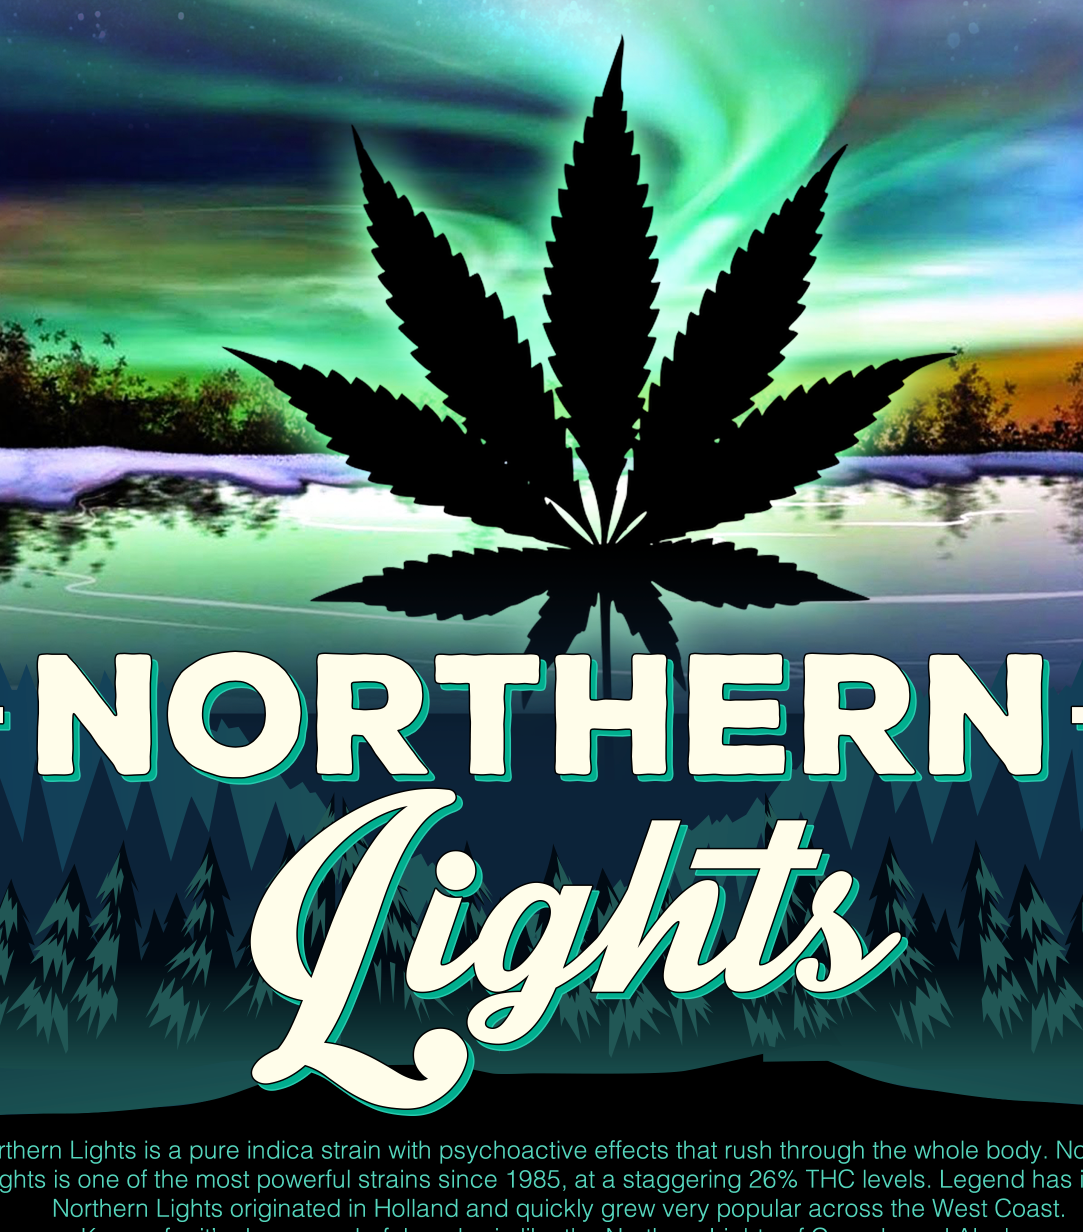 StonerDays Men's Northern Lights Tee with vibrant aurora graphic, front view, size options S-3XL